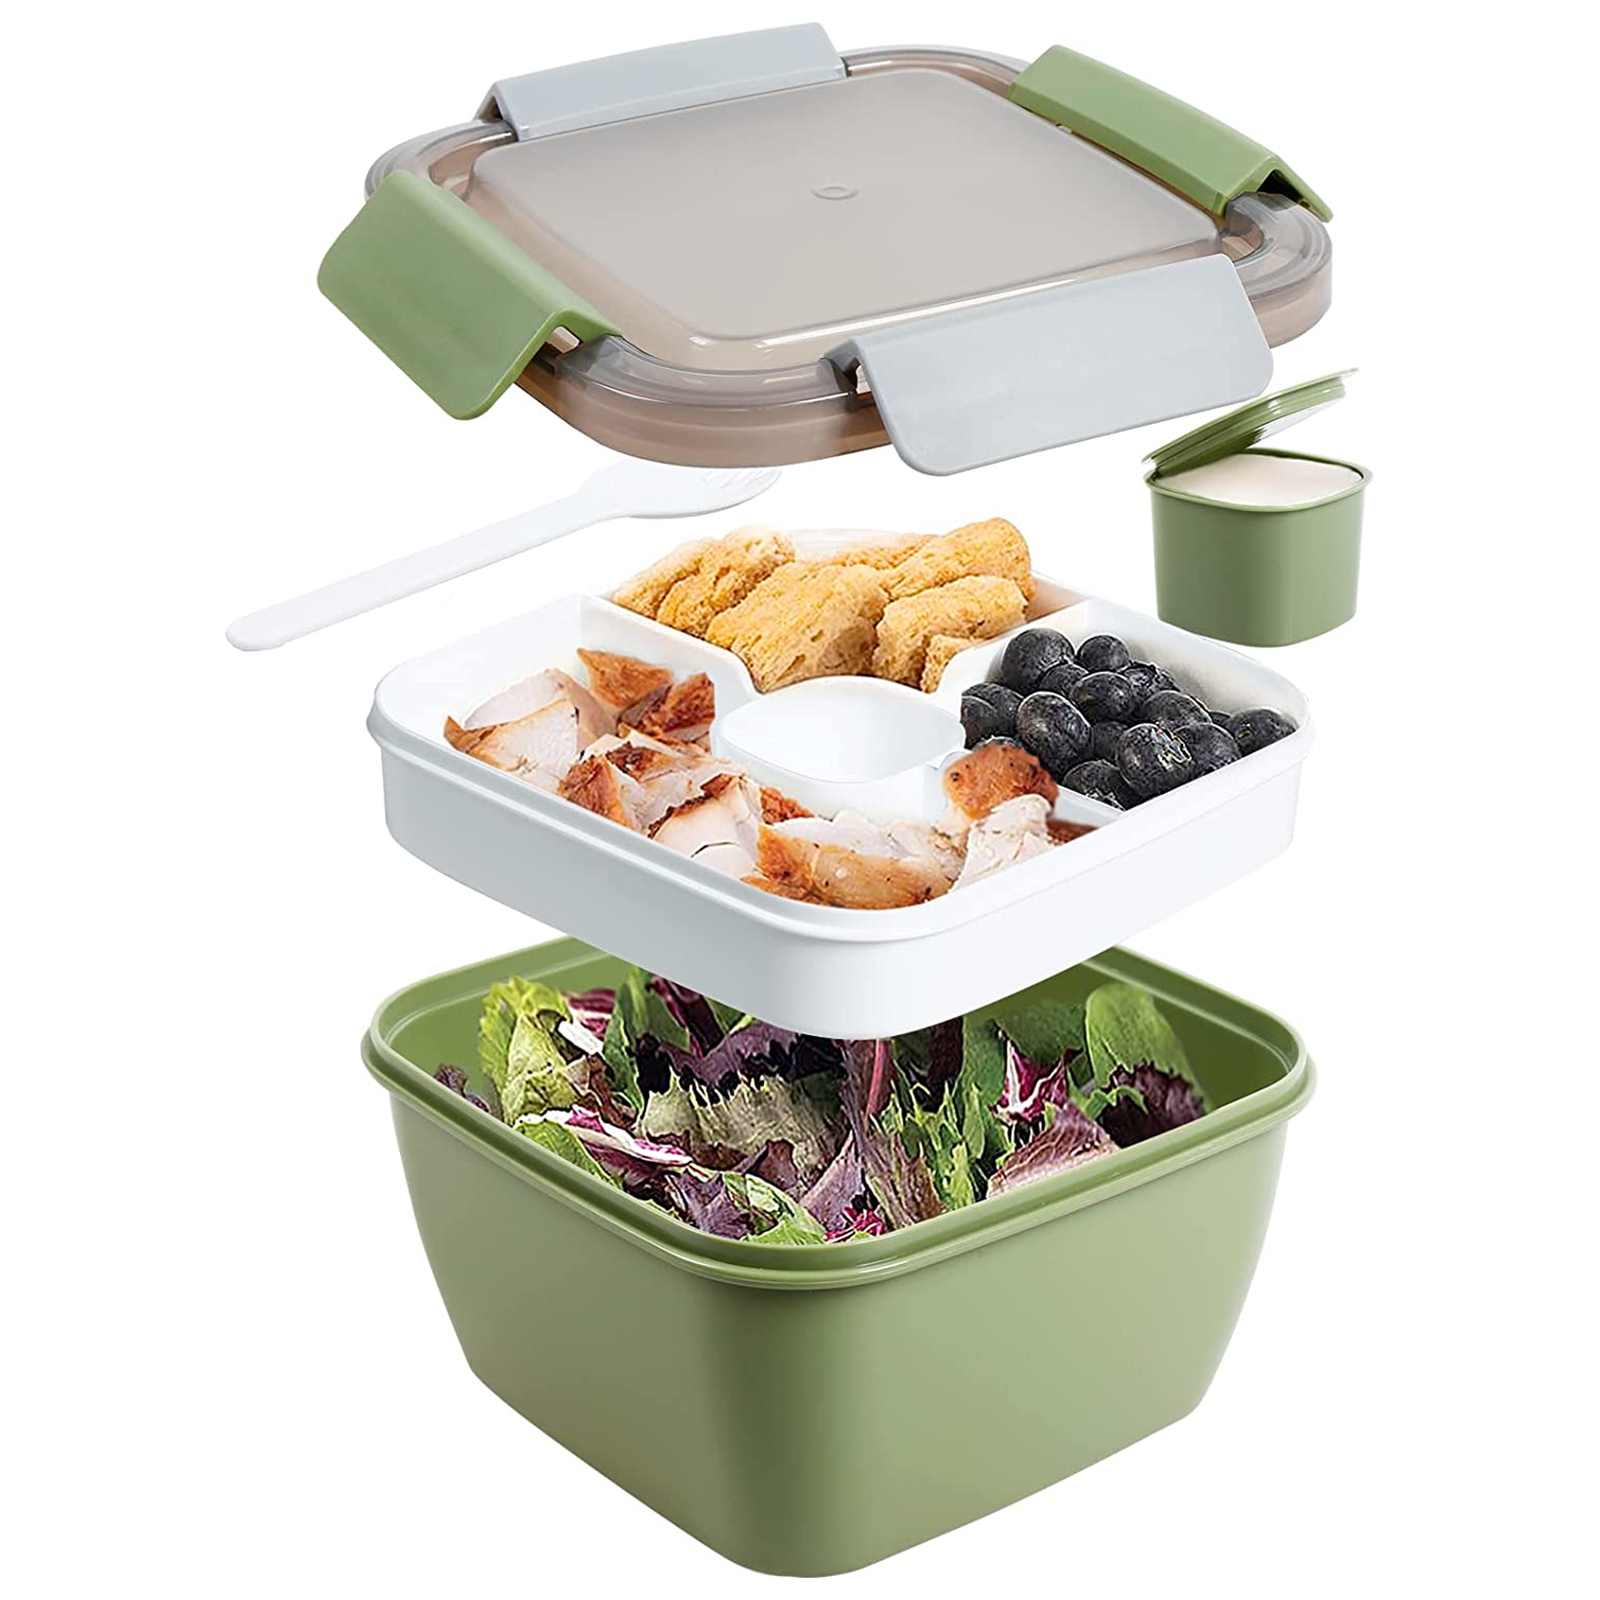 Altatac 6 pc, Container Salad Container, Lunch Box & Utensils, Green